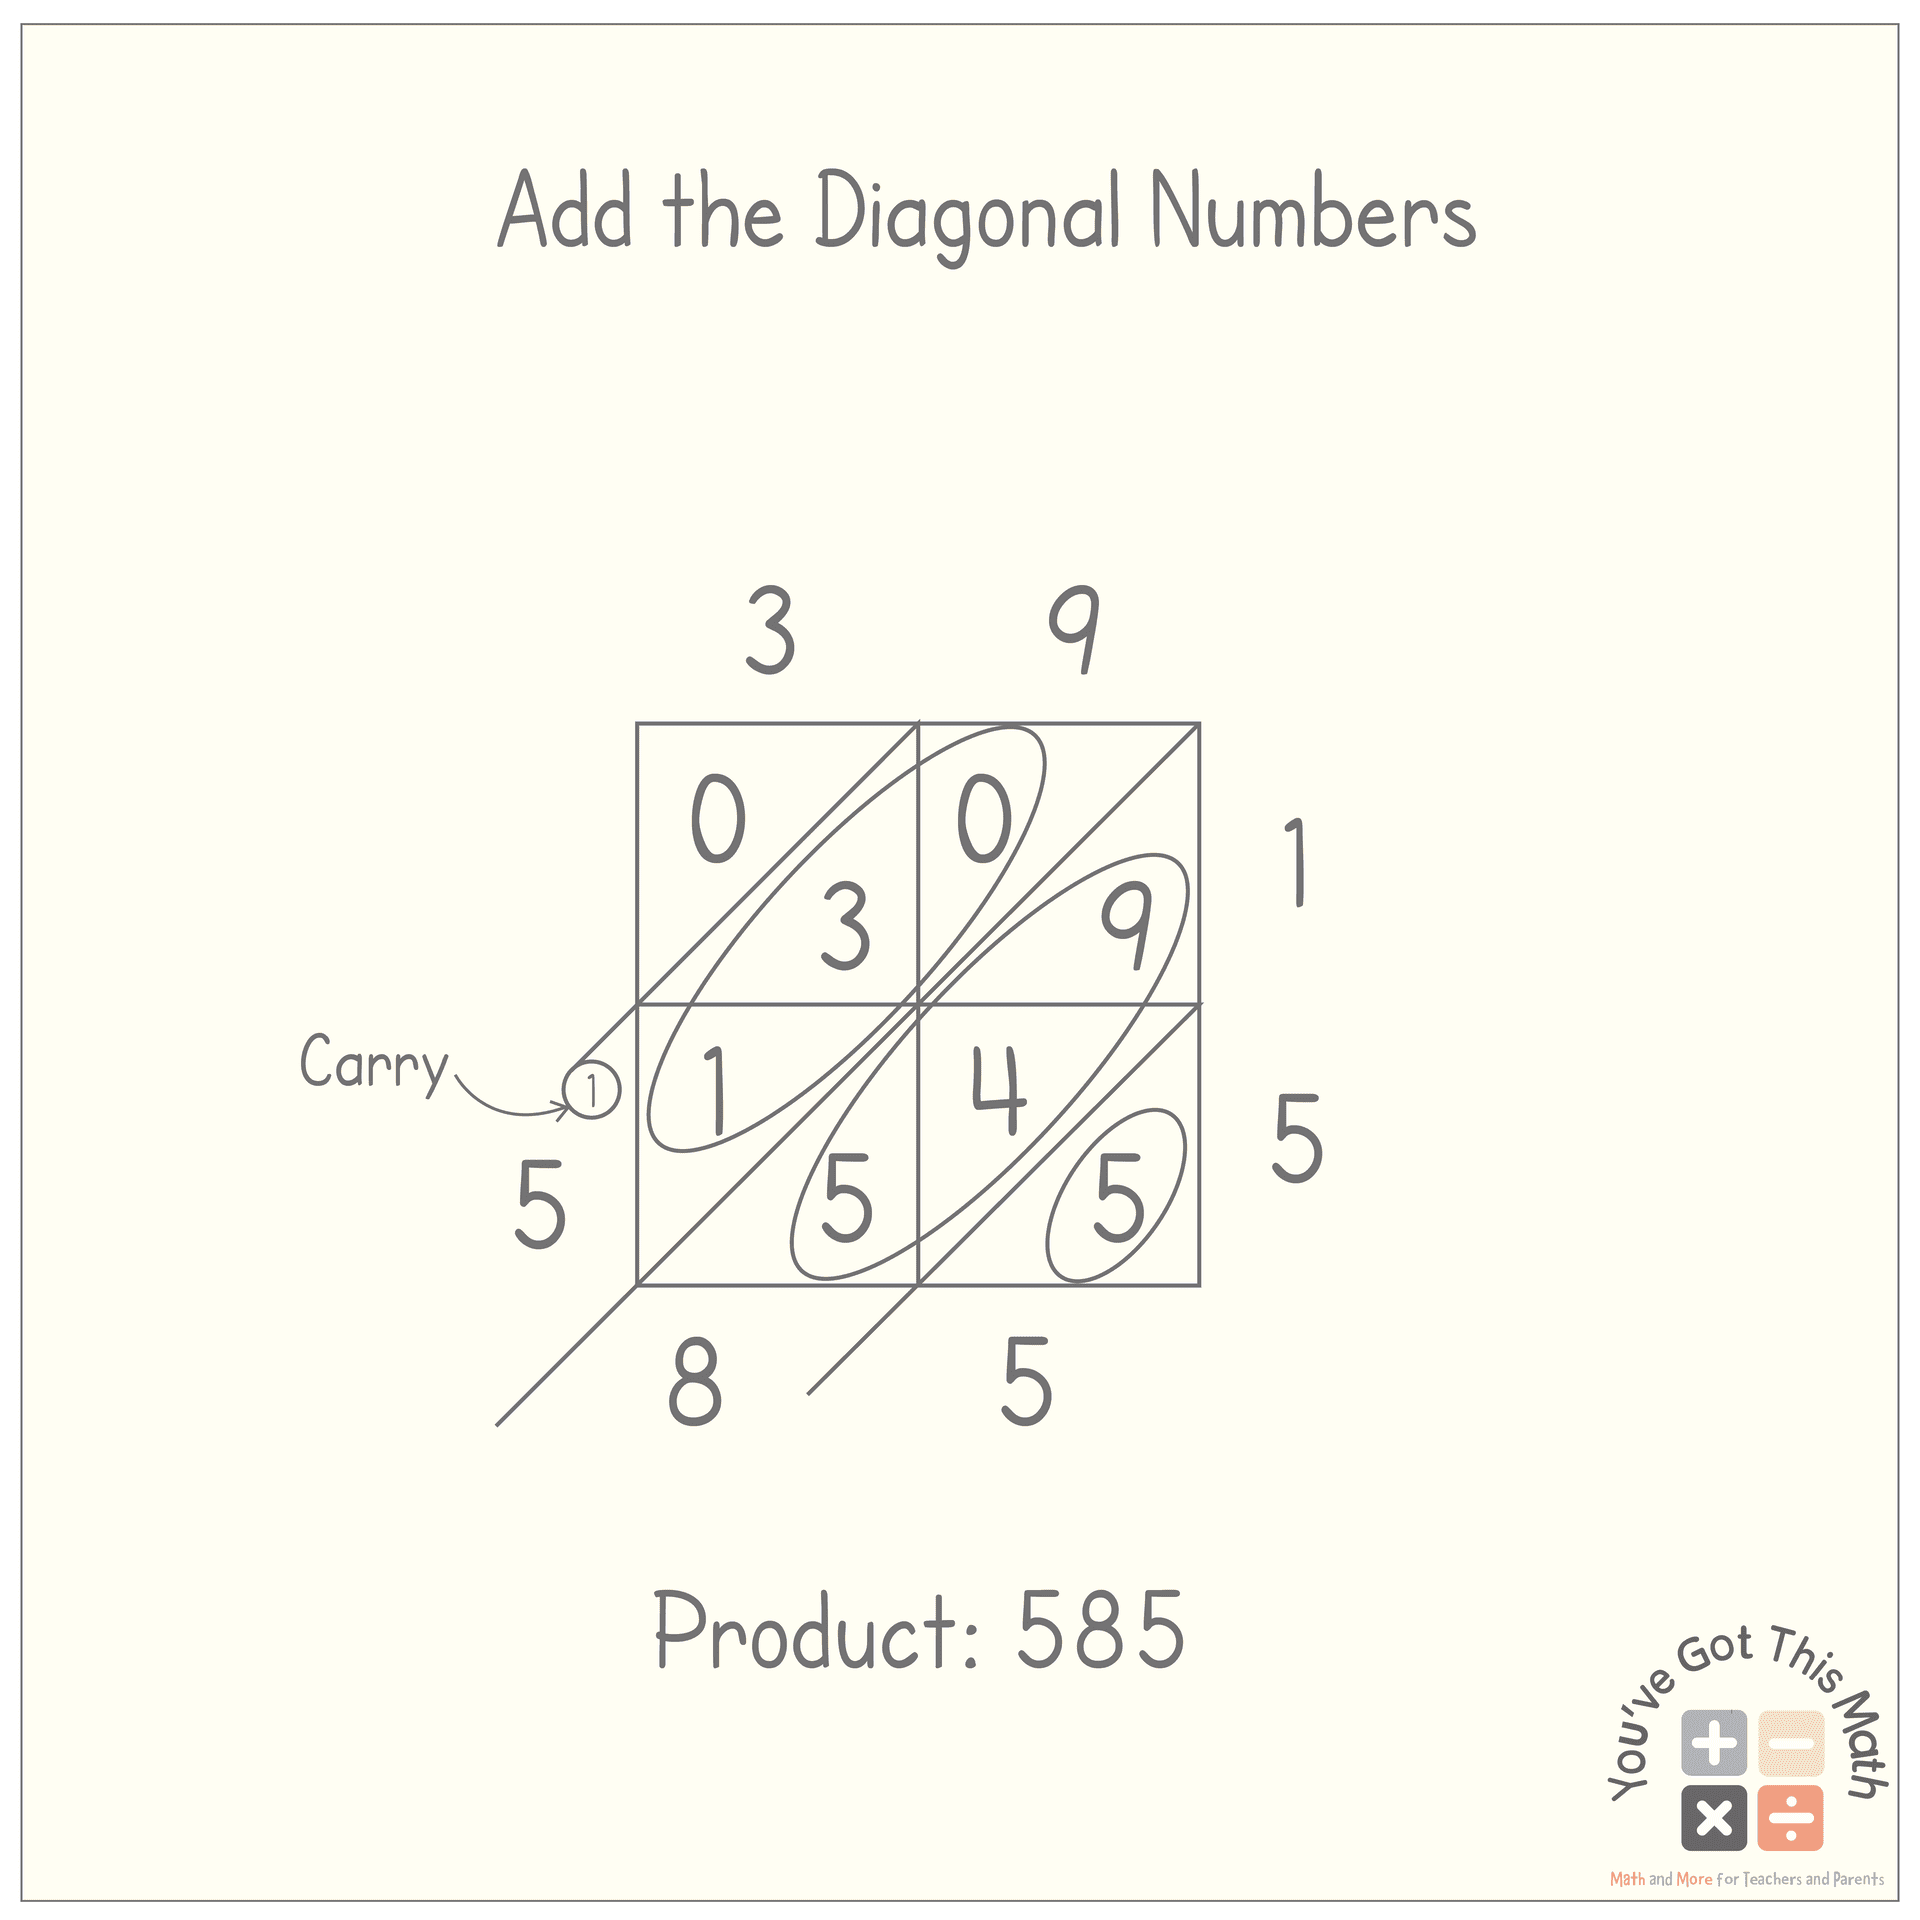 Add the Diagonal Numbers